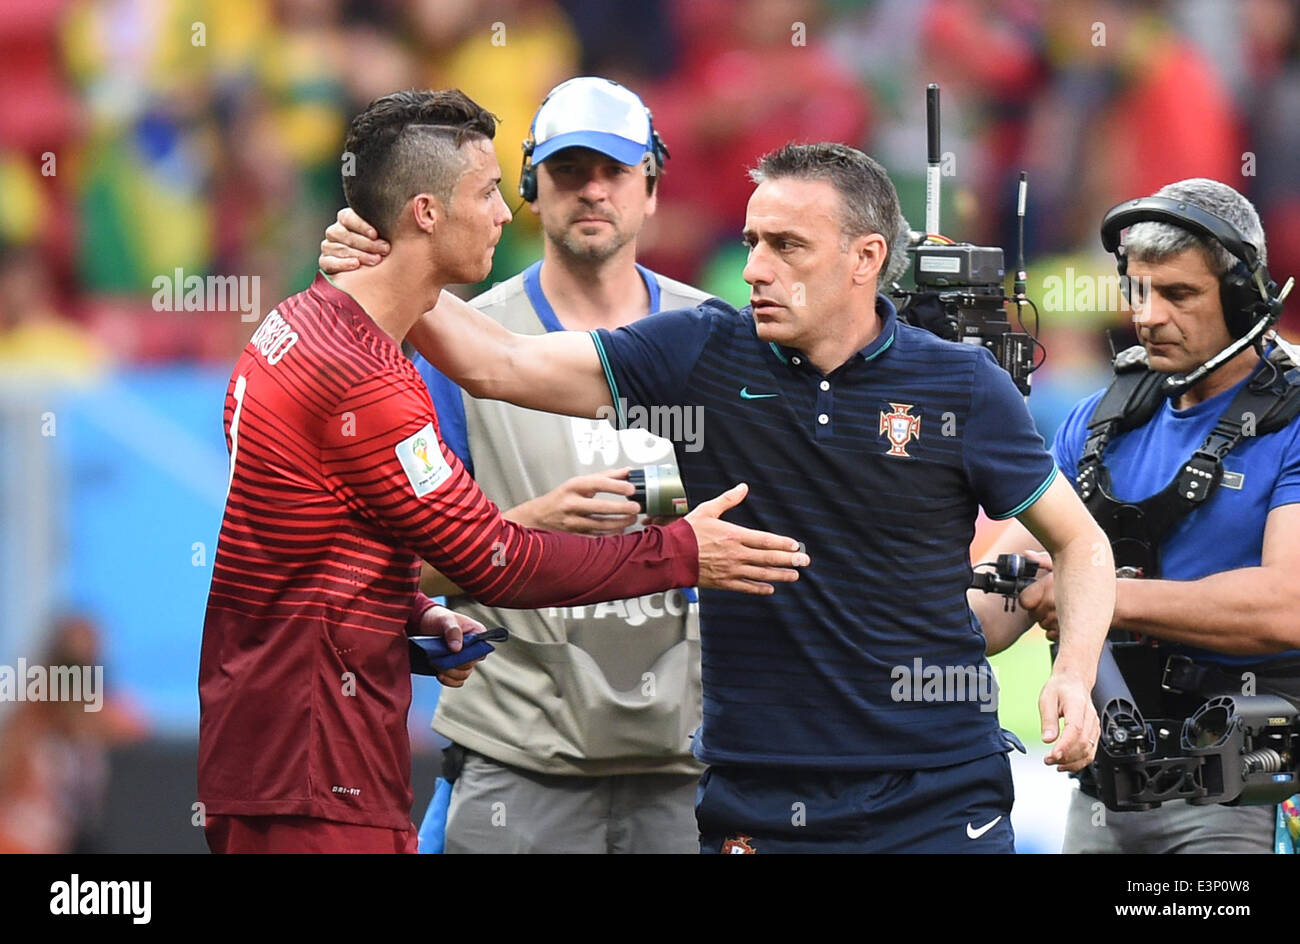 Brasilia, Brazil. 26th June, 2014. Cristiano Ronaldo (L) of Portugal hugs Portugal's head coach Paulo Bento after the FIFA World Cup 2014 group G preliminary round match between Portugal and Ghana at the Estadio National Stadium in Brasilia, Brazil, on 26 June 2014 Credit: © dpa picture alliance/Alamy Live News  Stock Photo